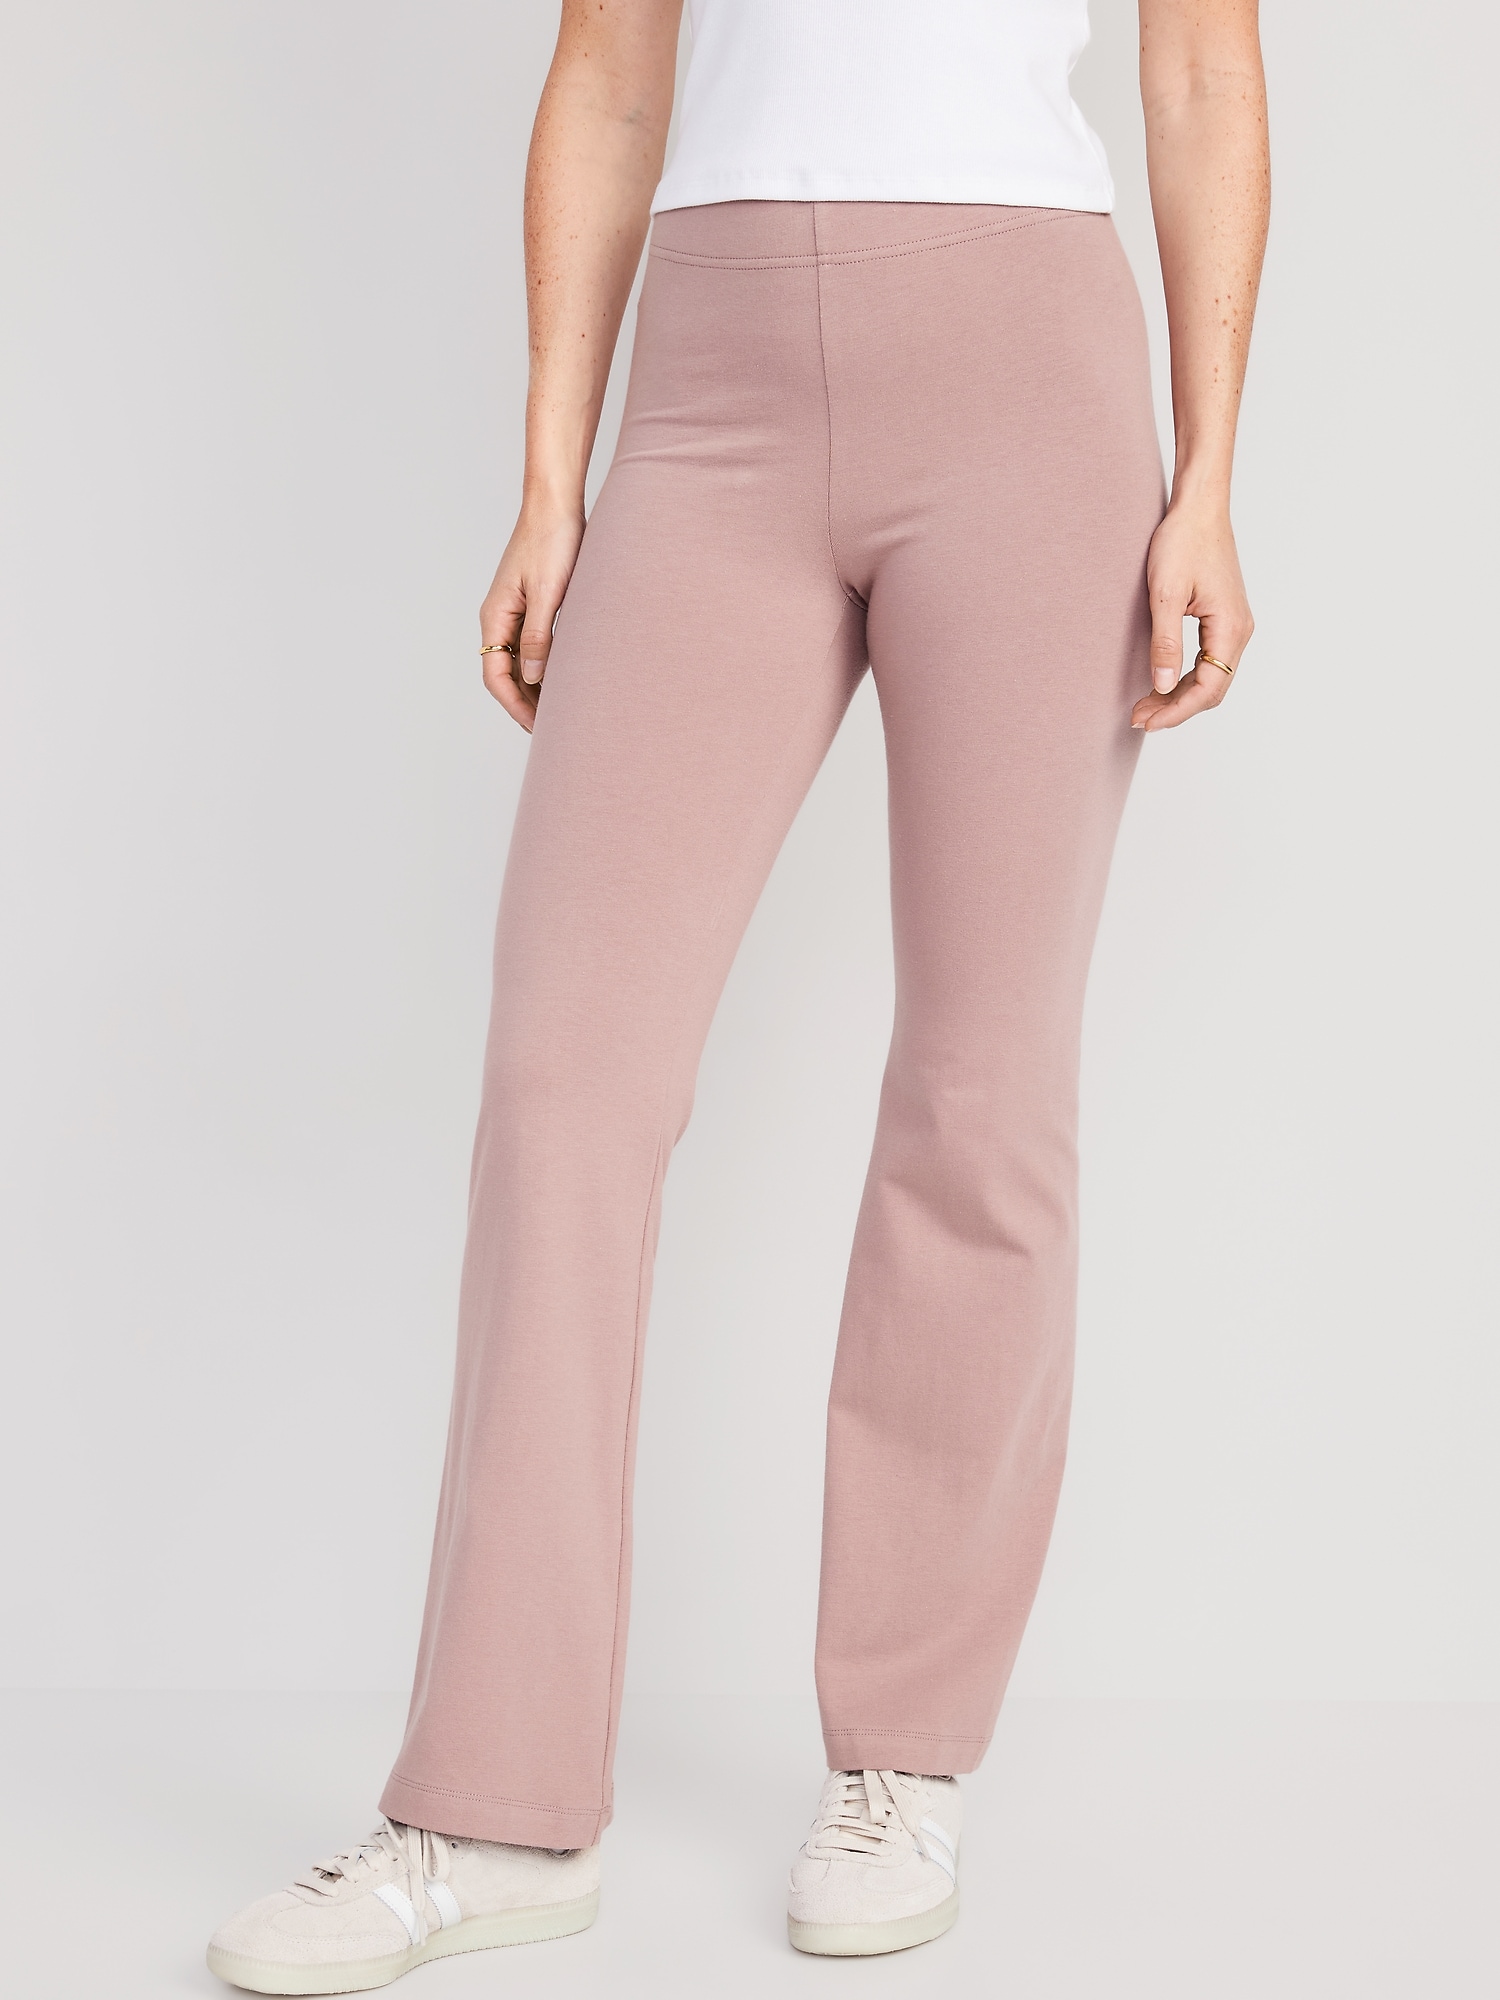 Old Navy High-Waisted Flare Leggings for Women pink - 763284053